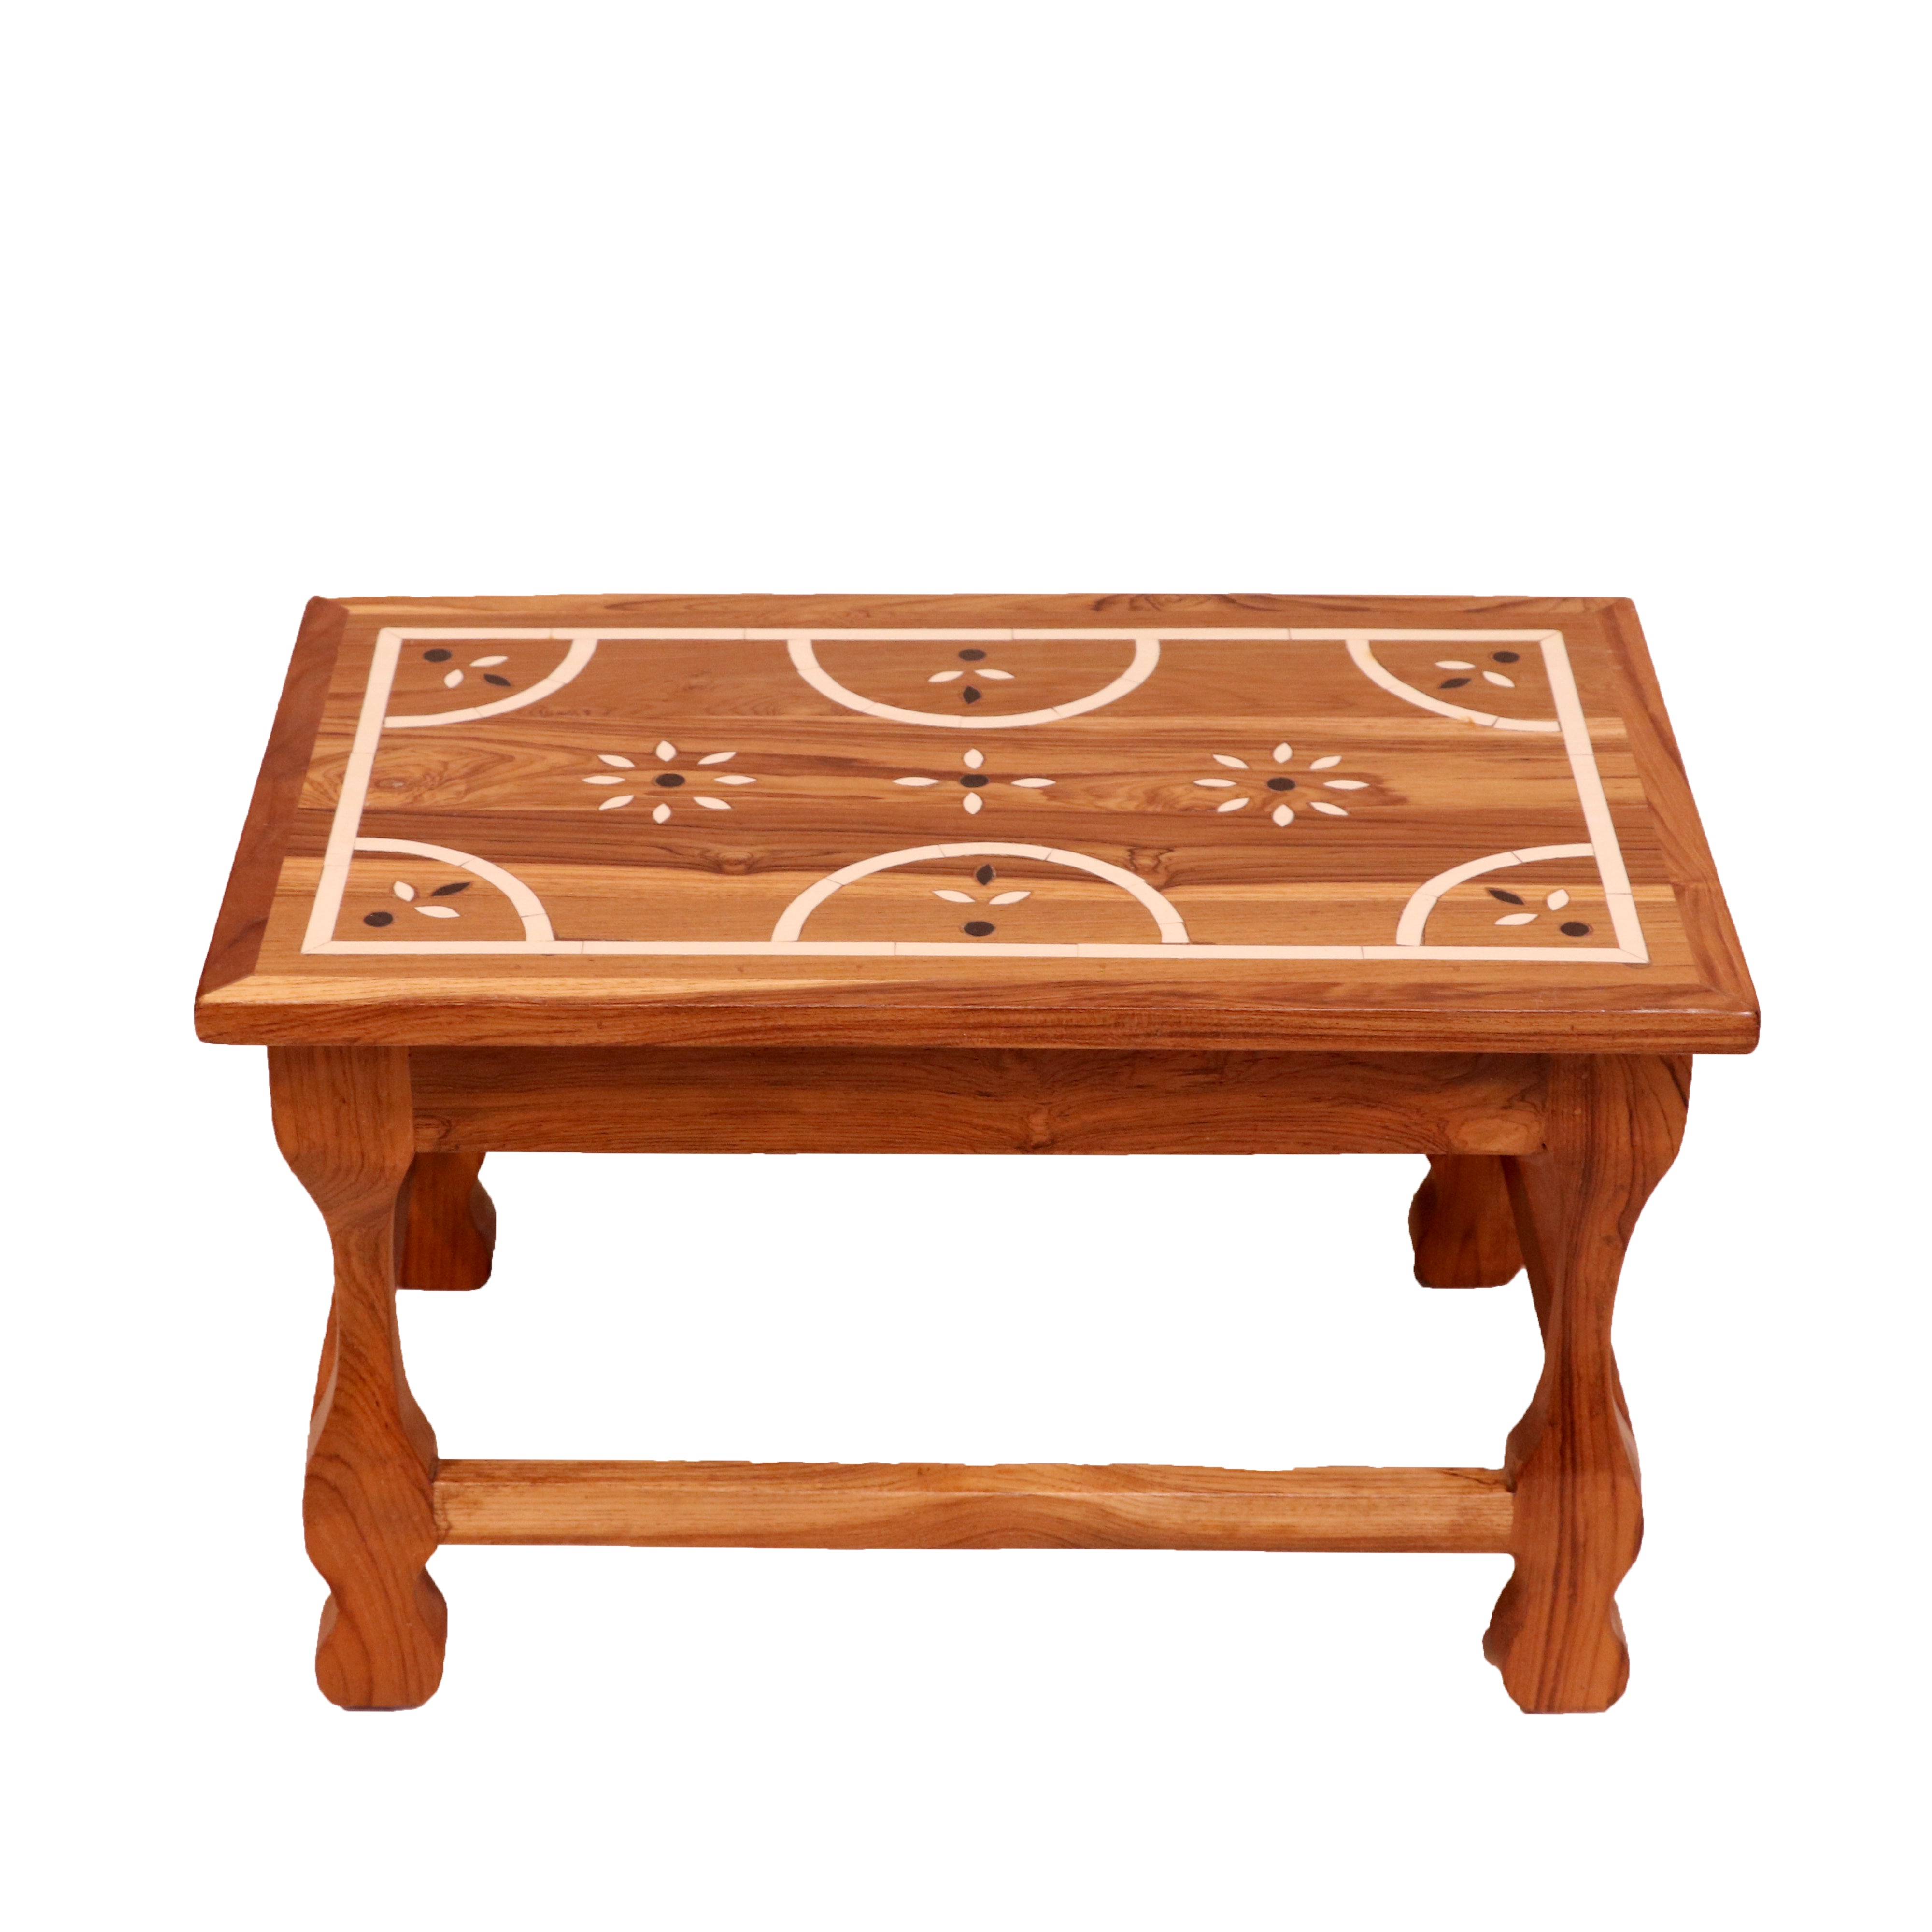 Antique Indian Inlay Designed Wooden Handmade Stool for Home Stool